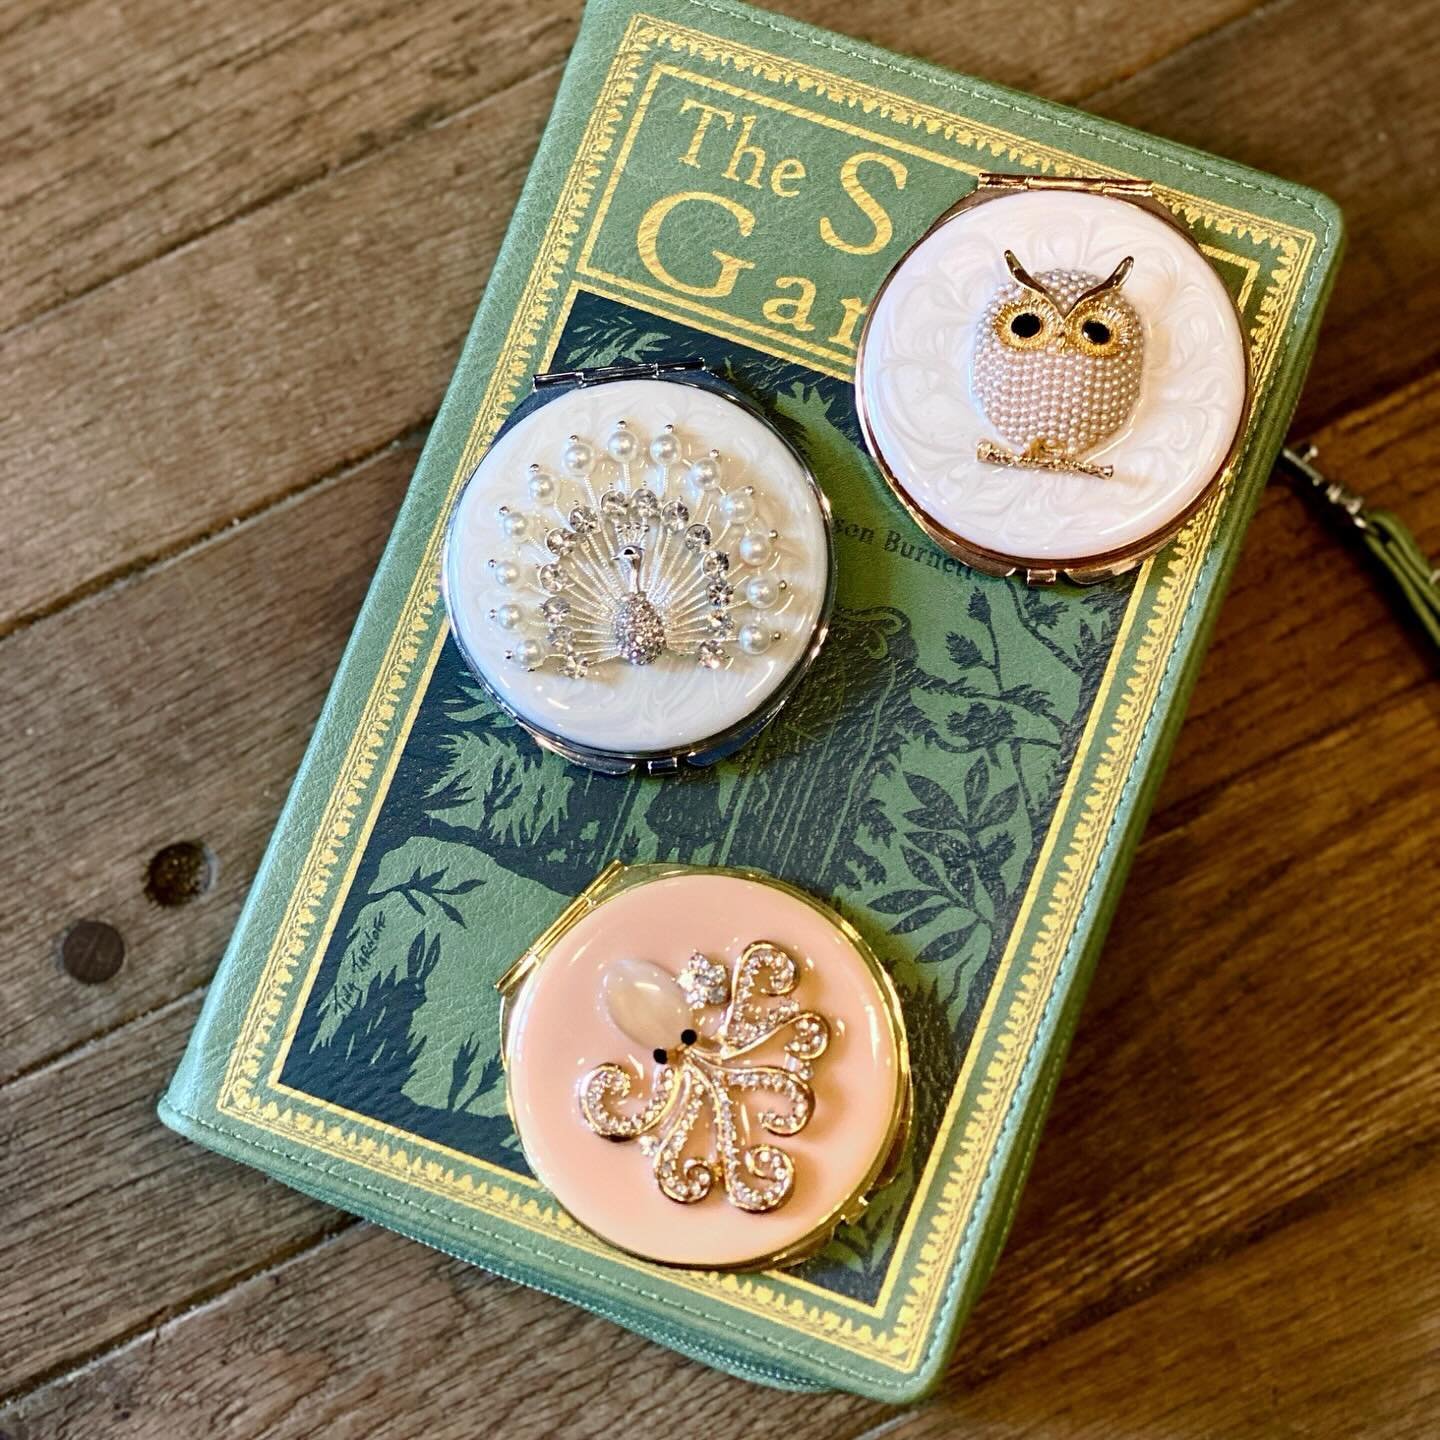 Looking to get mom something really special? Check out these beautiful mirror compacts we carry! They&rsquo;re so classy and we have a couple style options so you can find the perfect fit 🥰